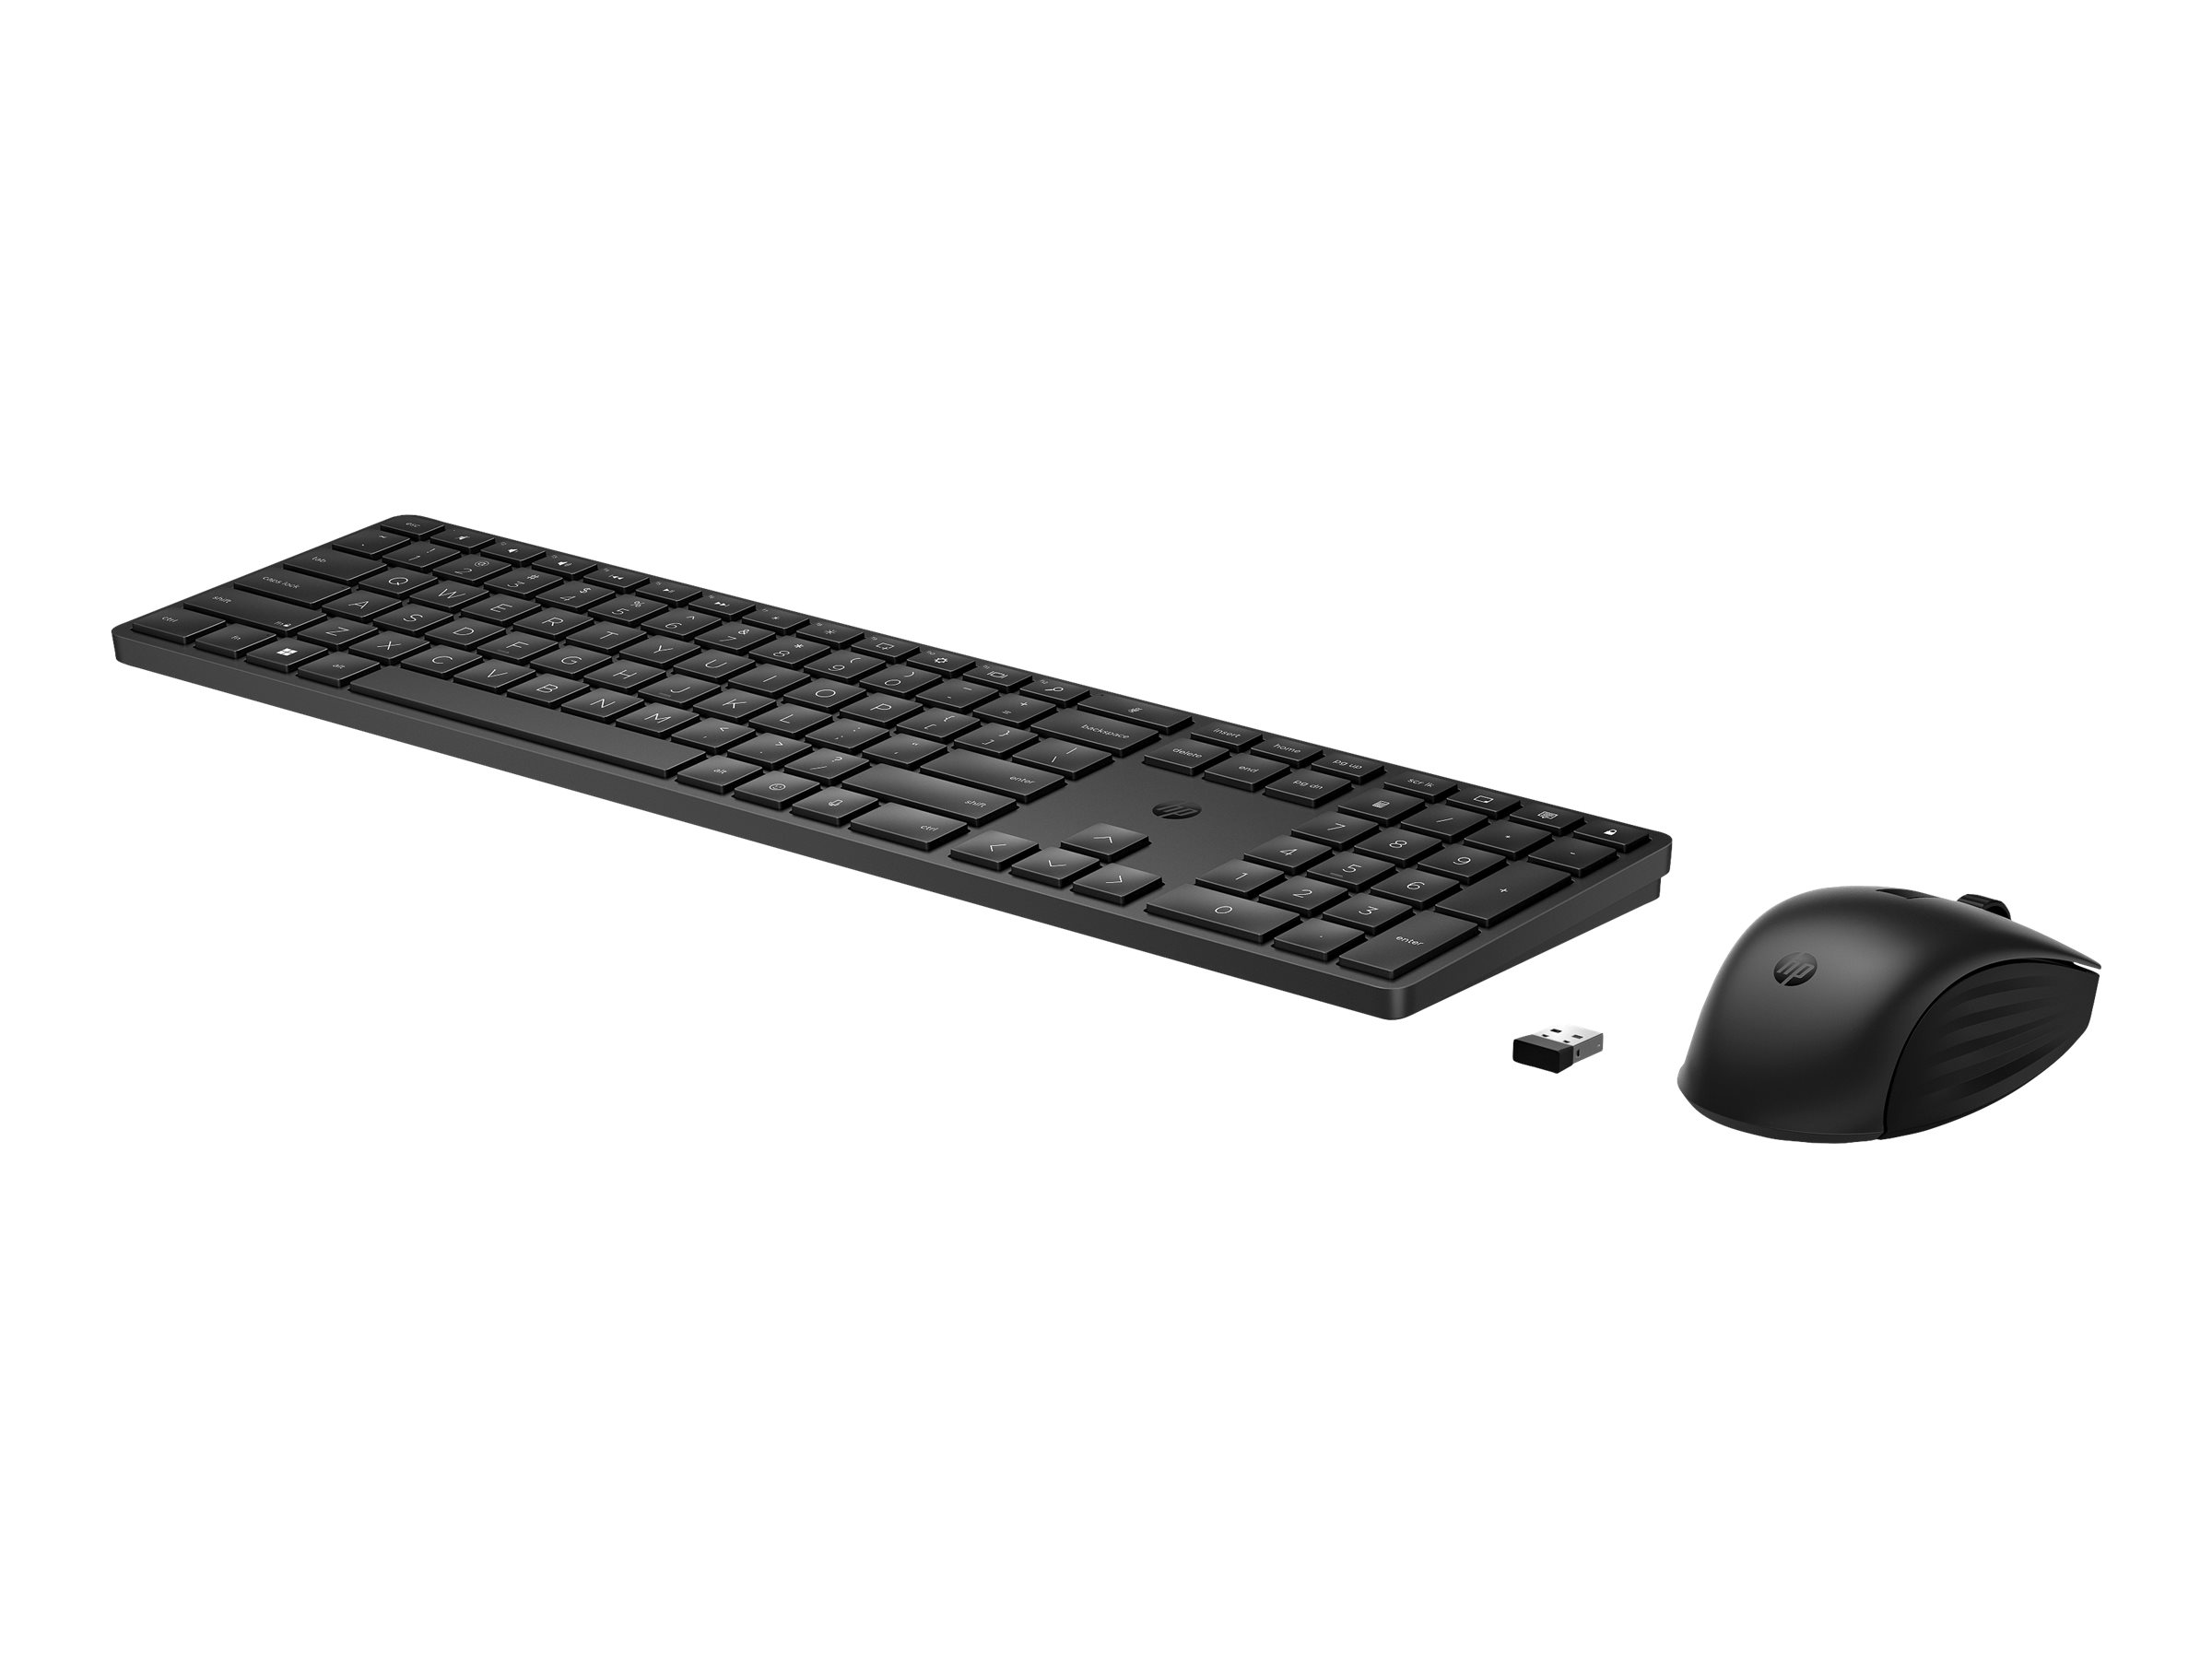 HP 650 Wireless Keyboard and Mouse (P) (4R013AA#ABD)